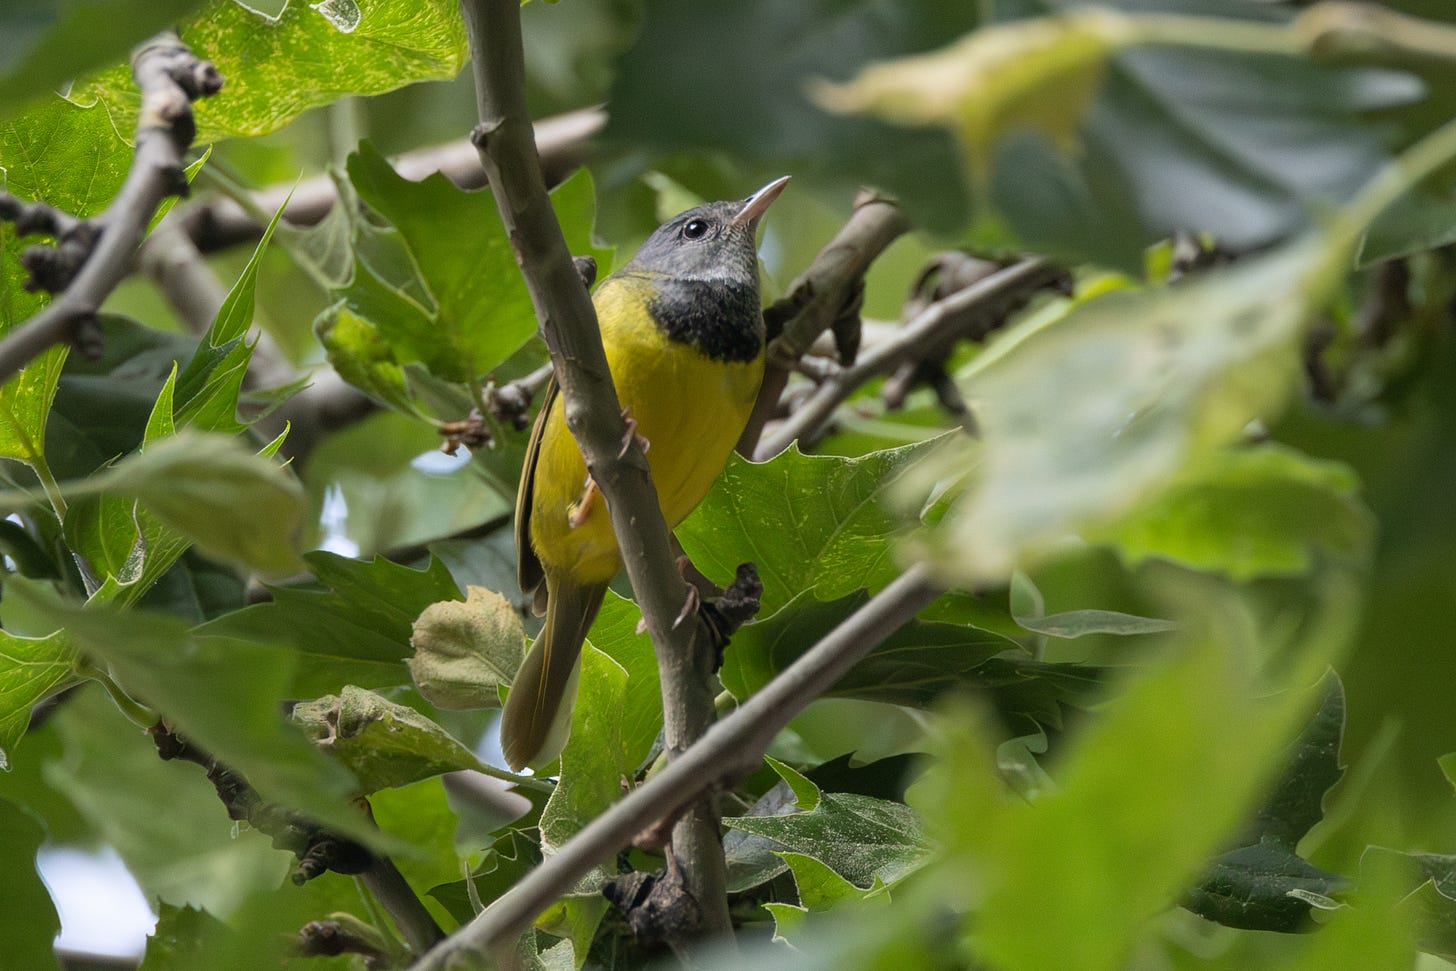 a small lemon-yellow bird with a gray head and black breast perched in a tree looking up.